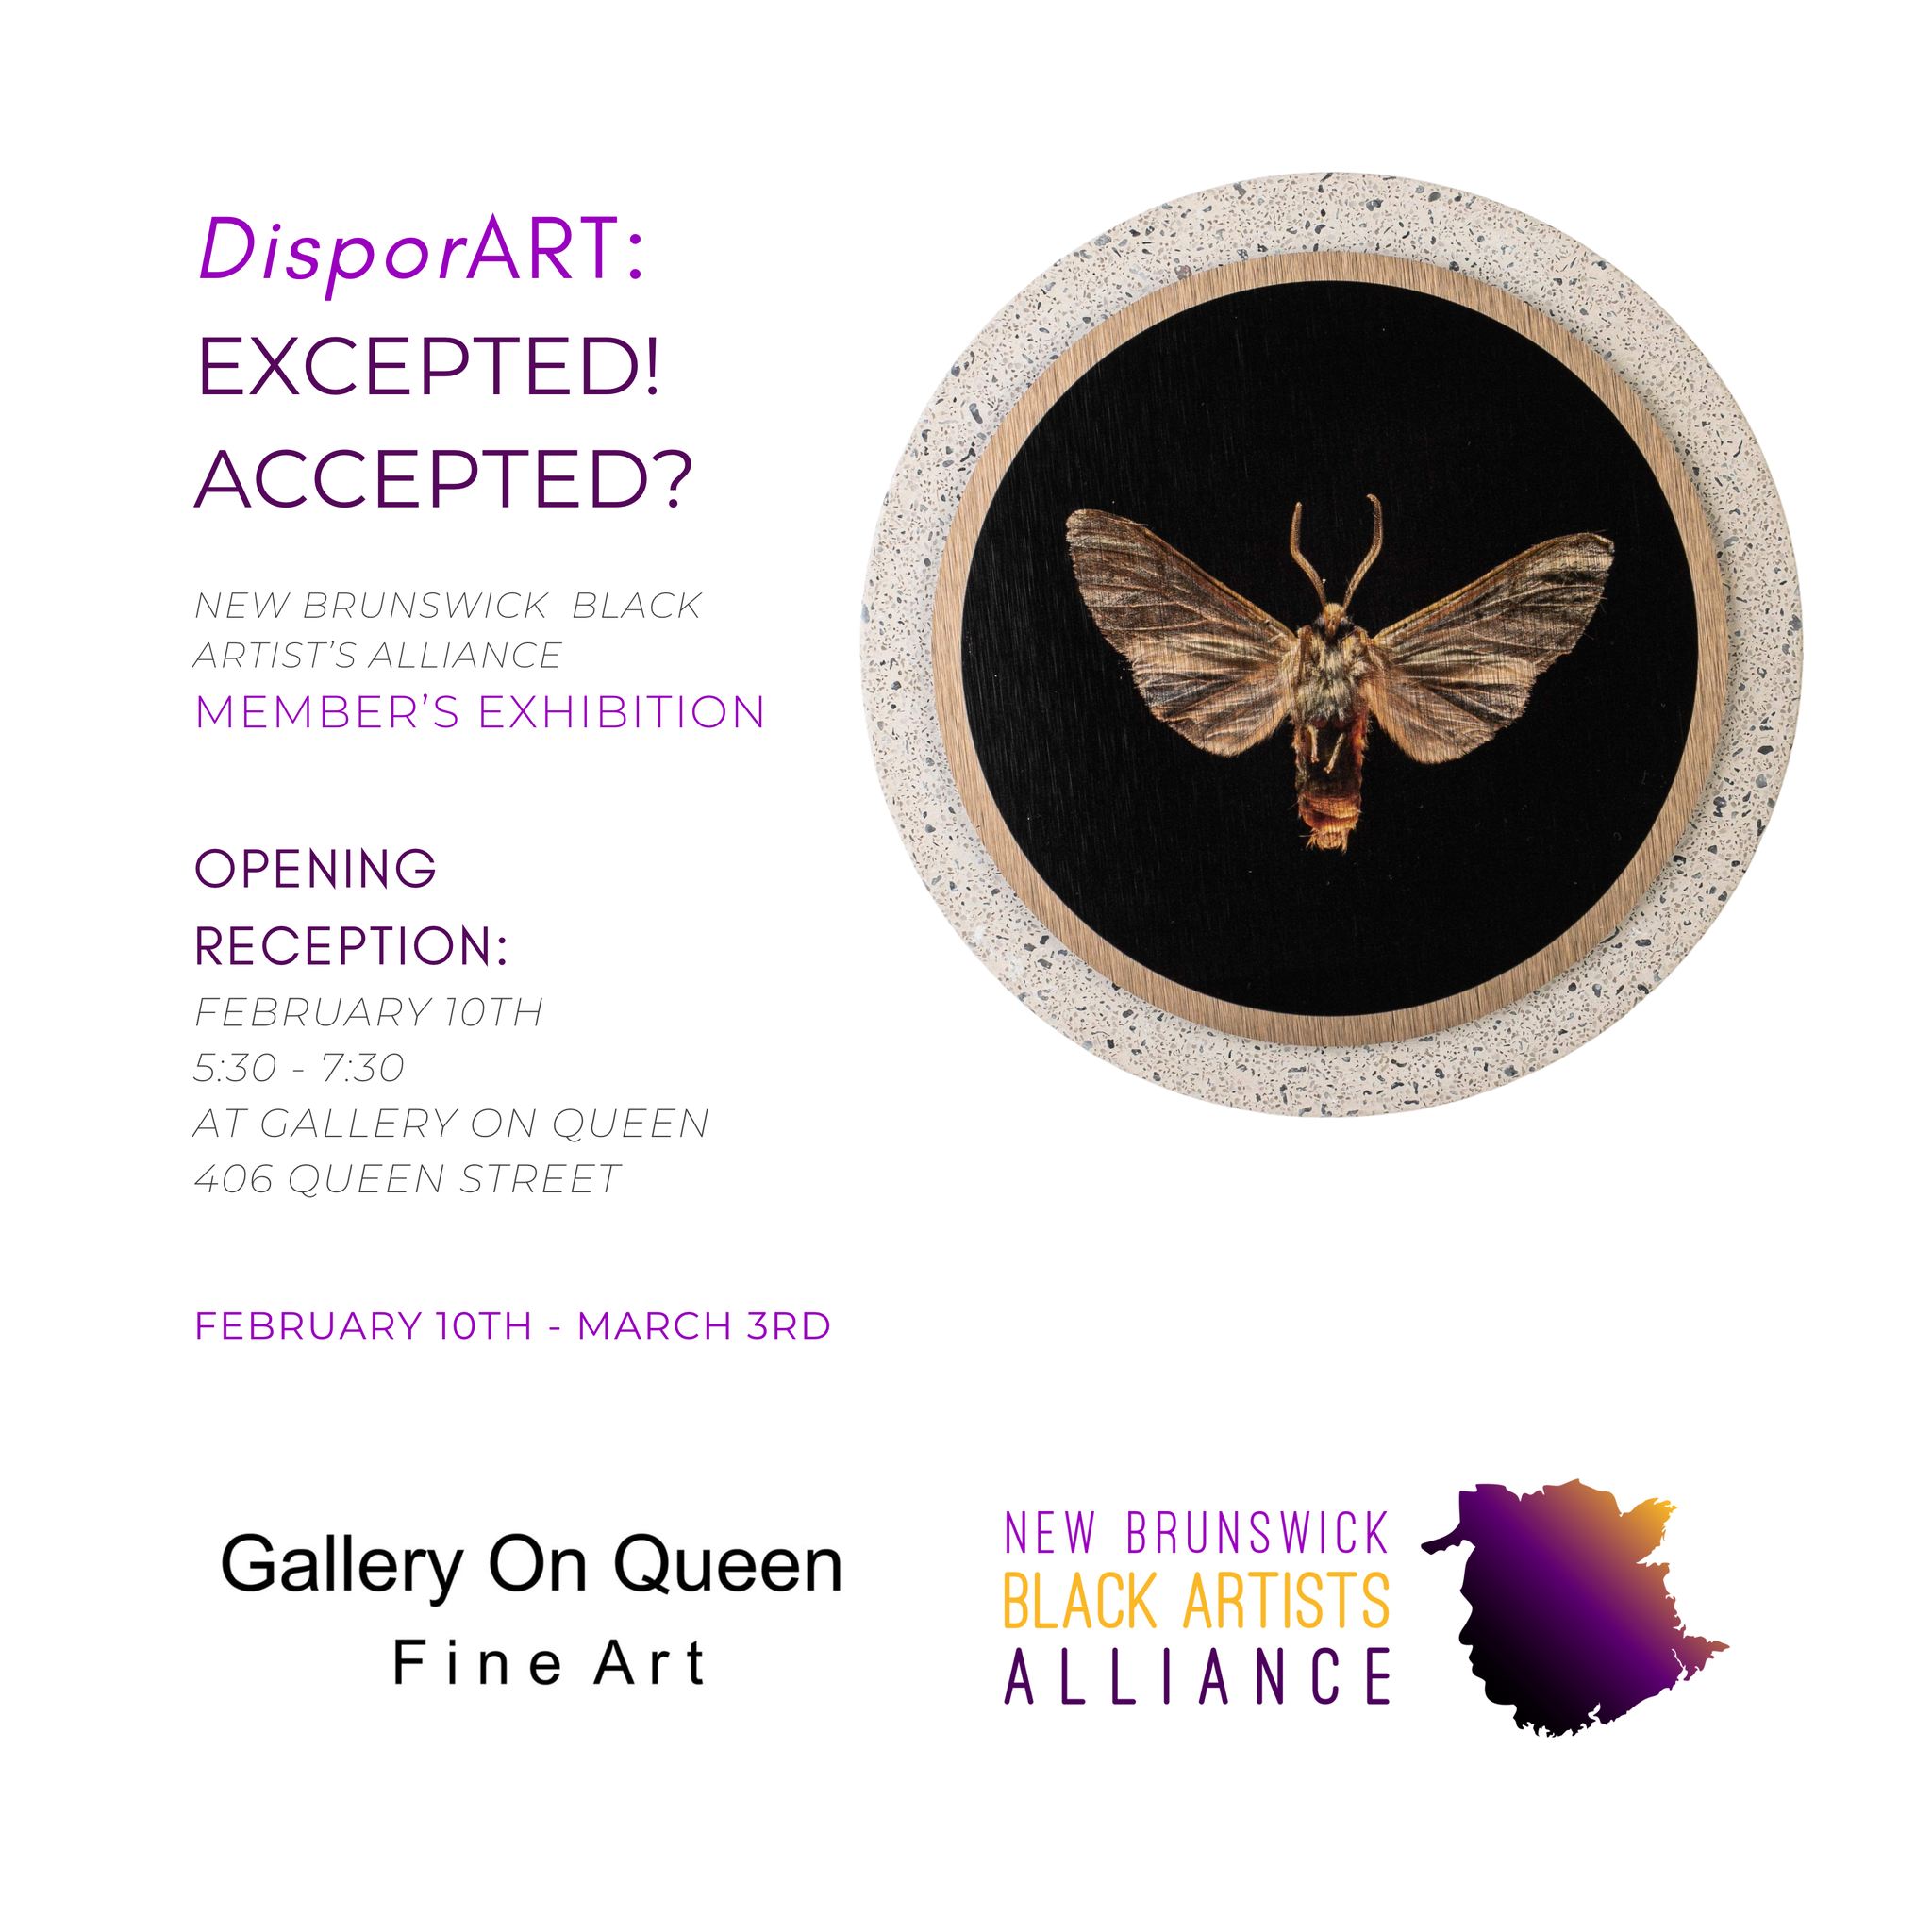 Image of a moth. Text reads: DisporART EXCEPTED! ACCEPTED? New Brunswick Black Artists' Alliance, members' exhibition. opening reception February 10th, 5:30pm - 7:30pm at Gallery on Queen 406 Queen Street, February 10th - March 3rd